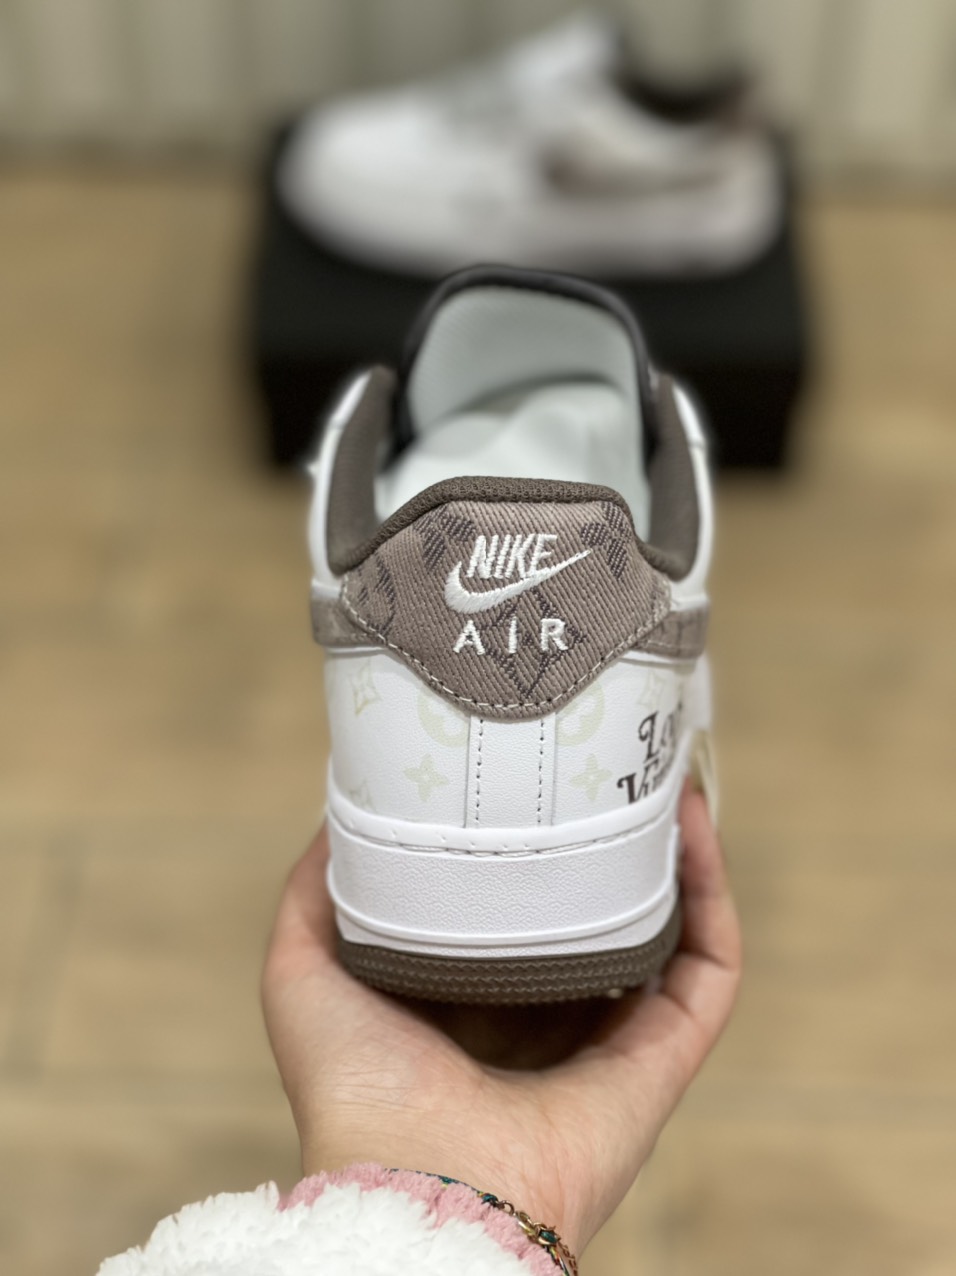 Giày Nike Air Force 1 Low Louis Vuitton White Brown Like Auth